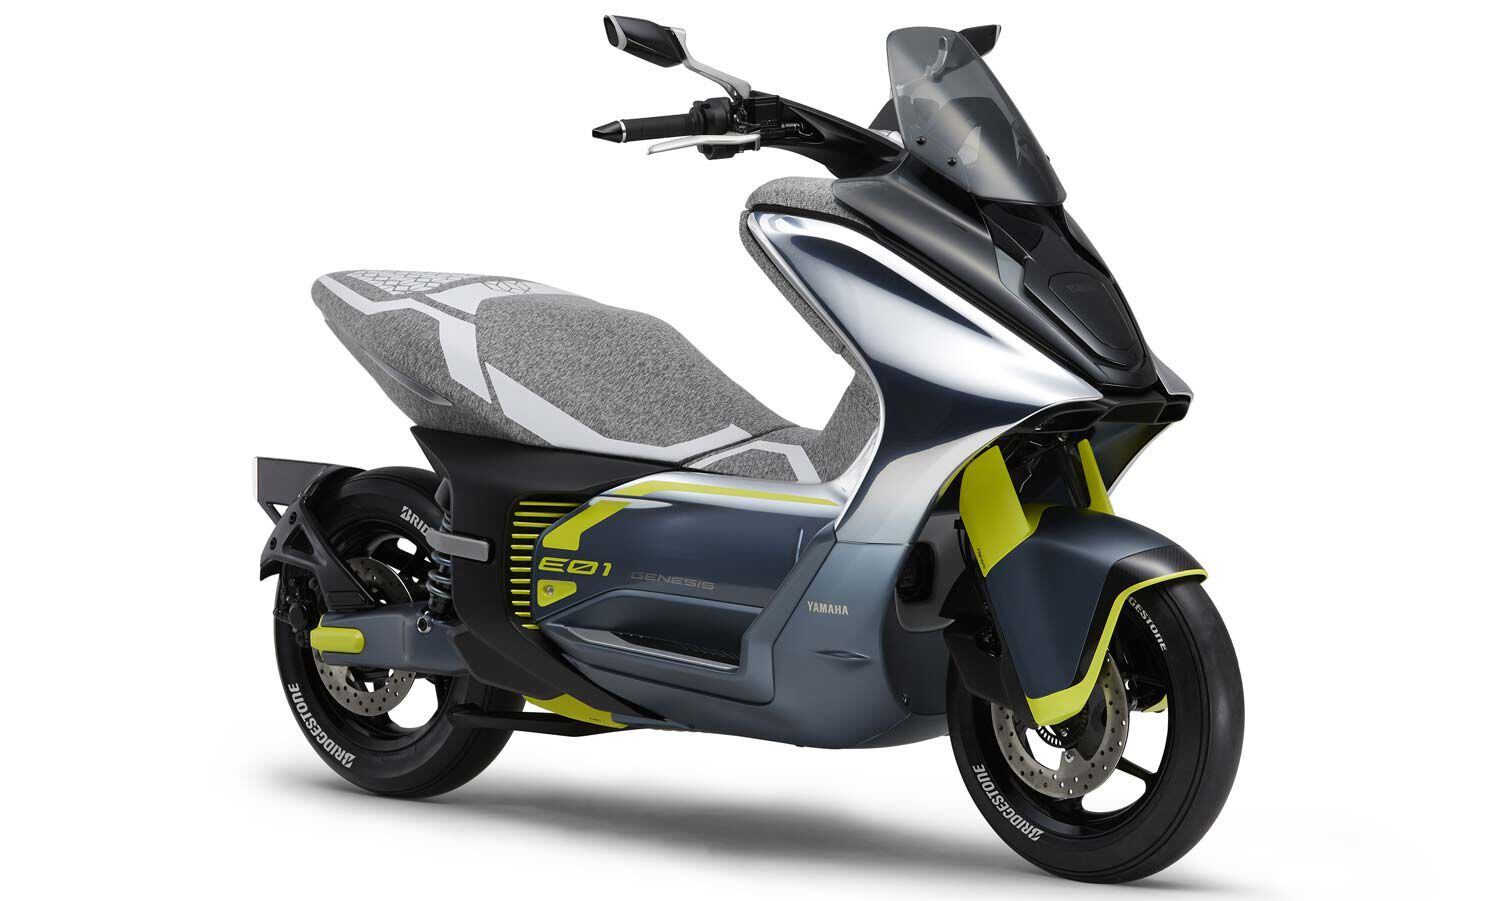 Yamaha’s E01, first revealed as this concept, now seems to be close to production, though in modified form.